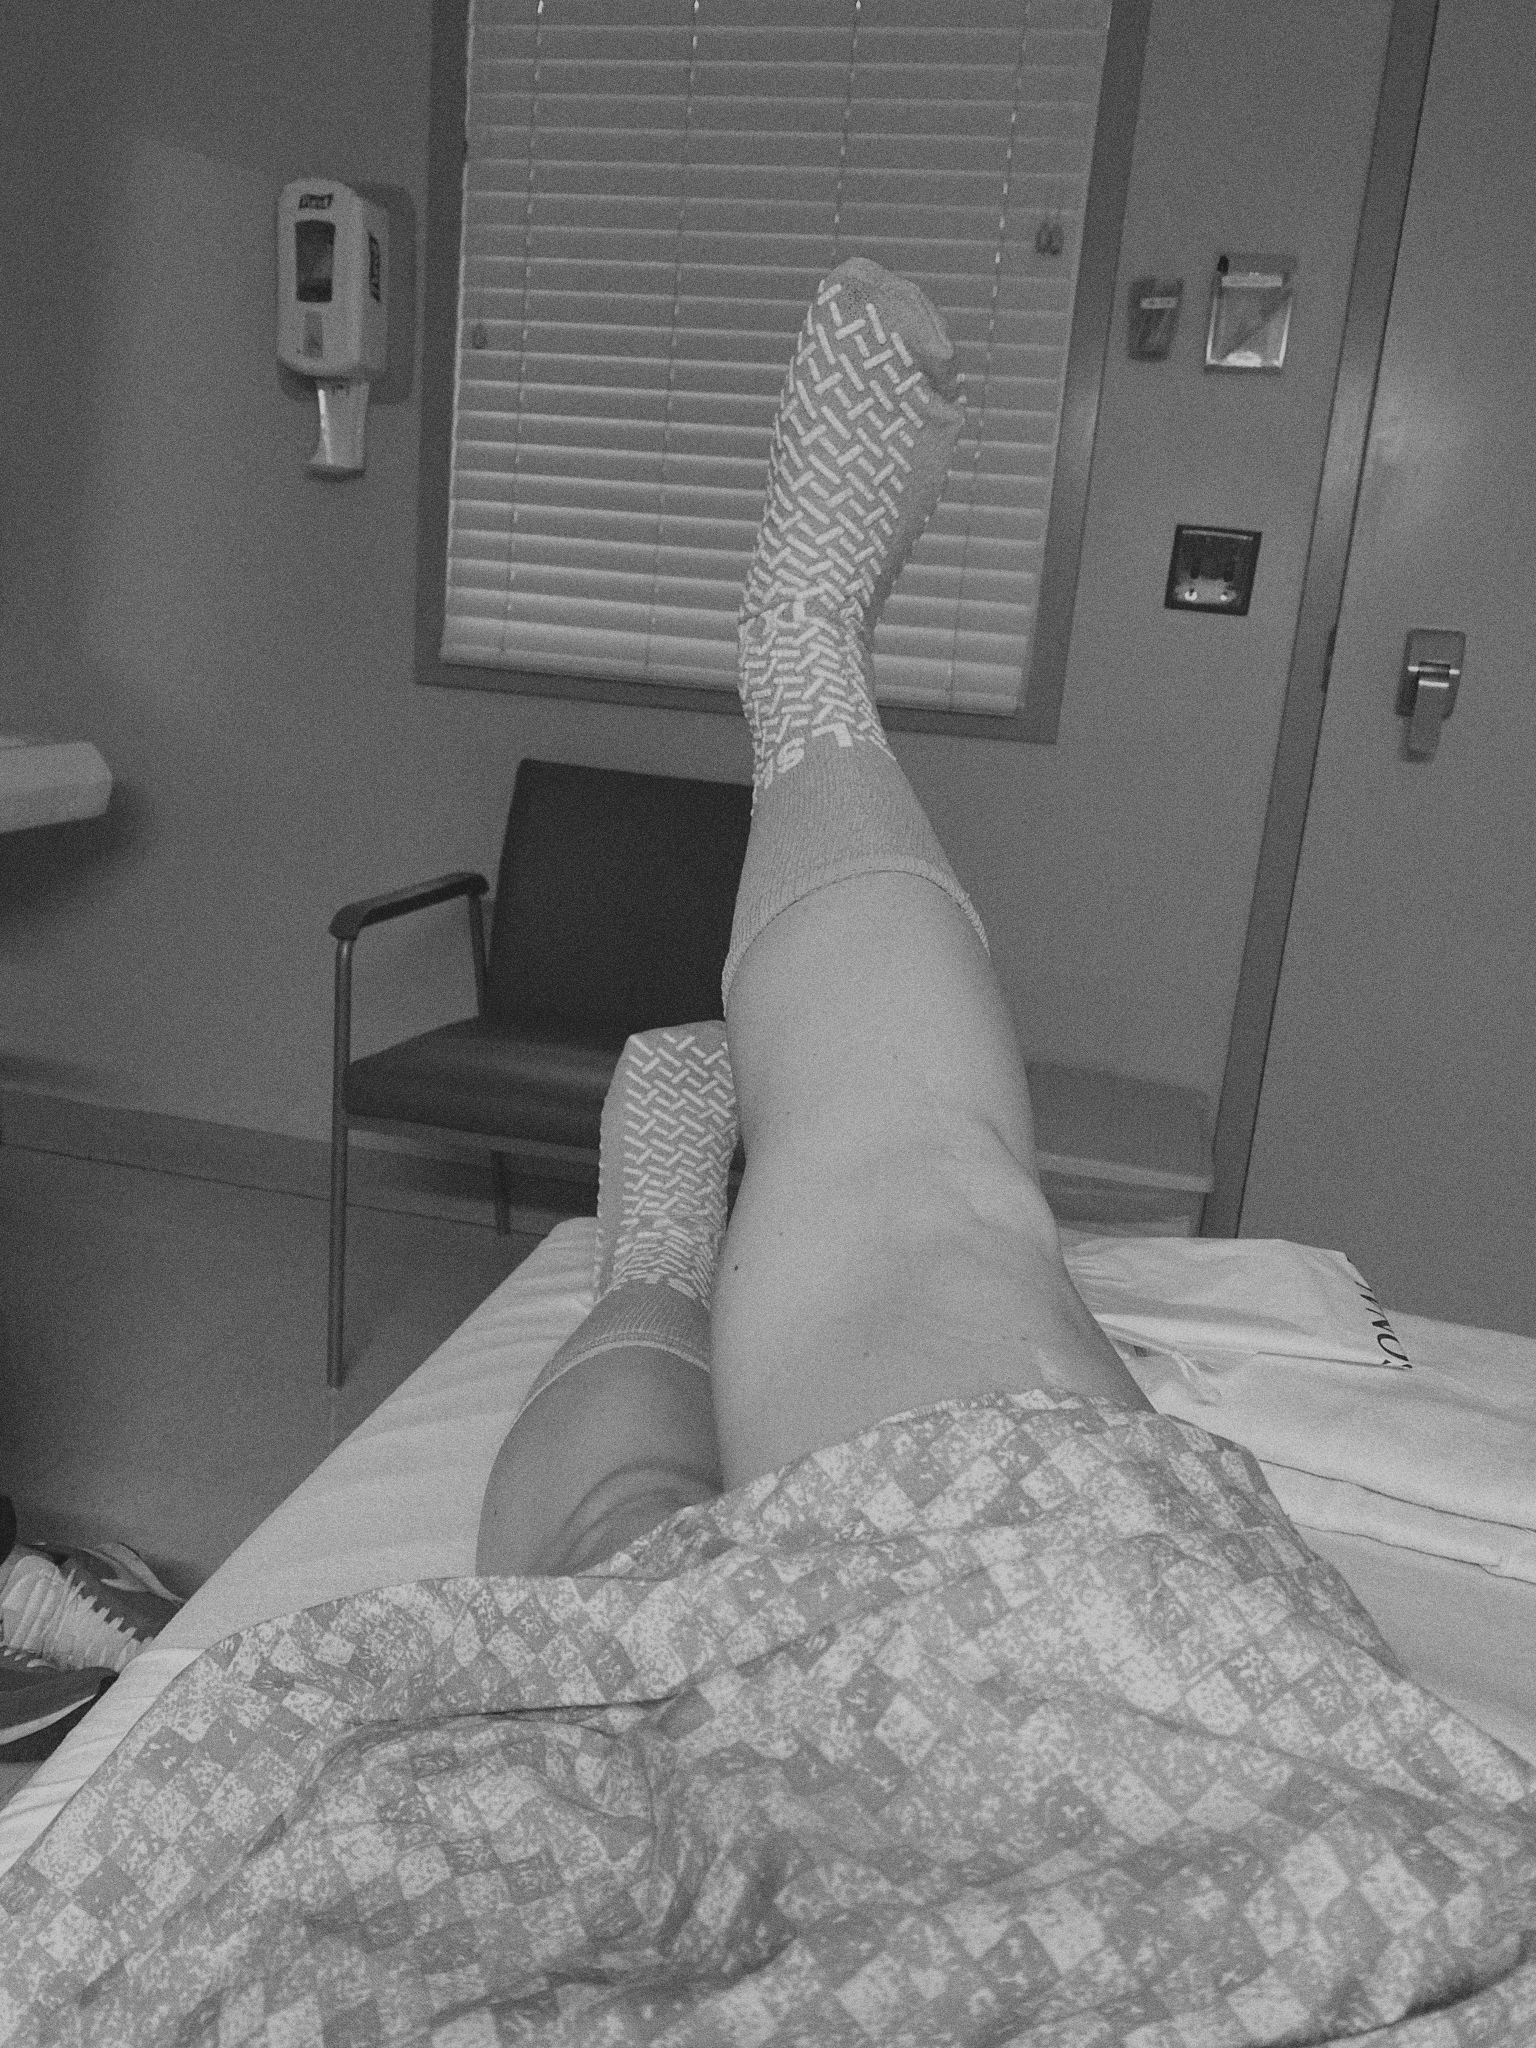 Savannah's legs laying down in a hospital bed